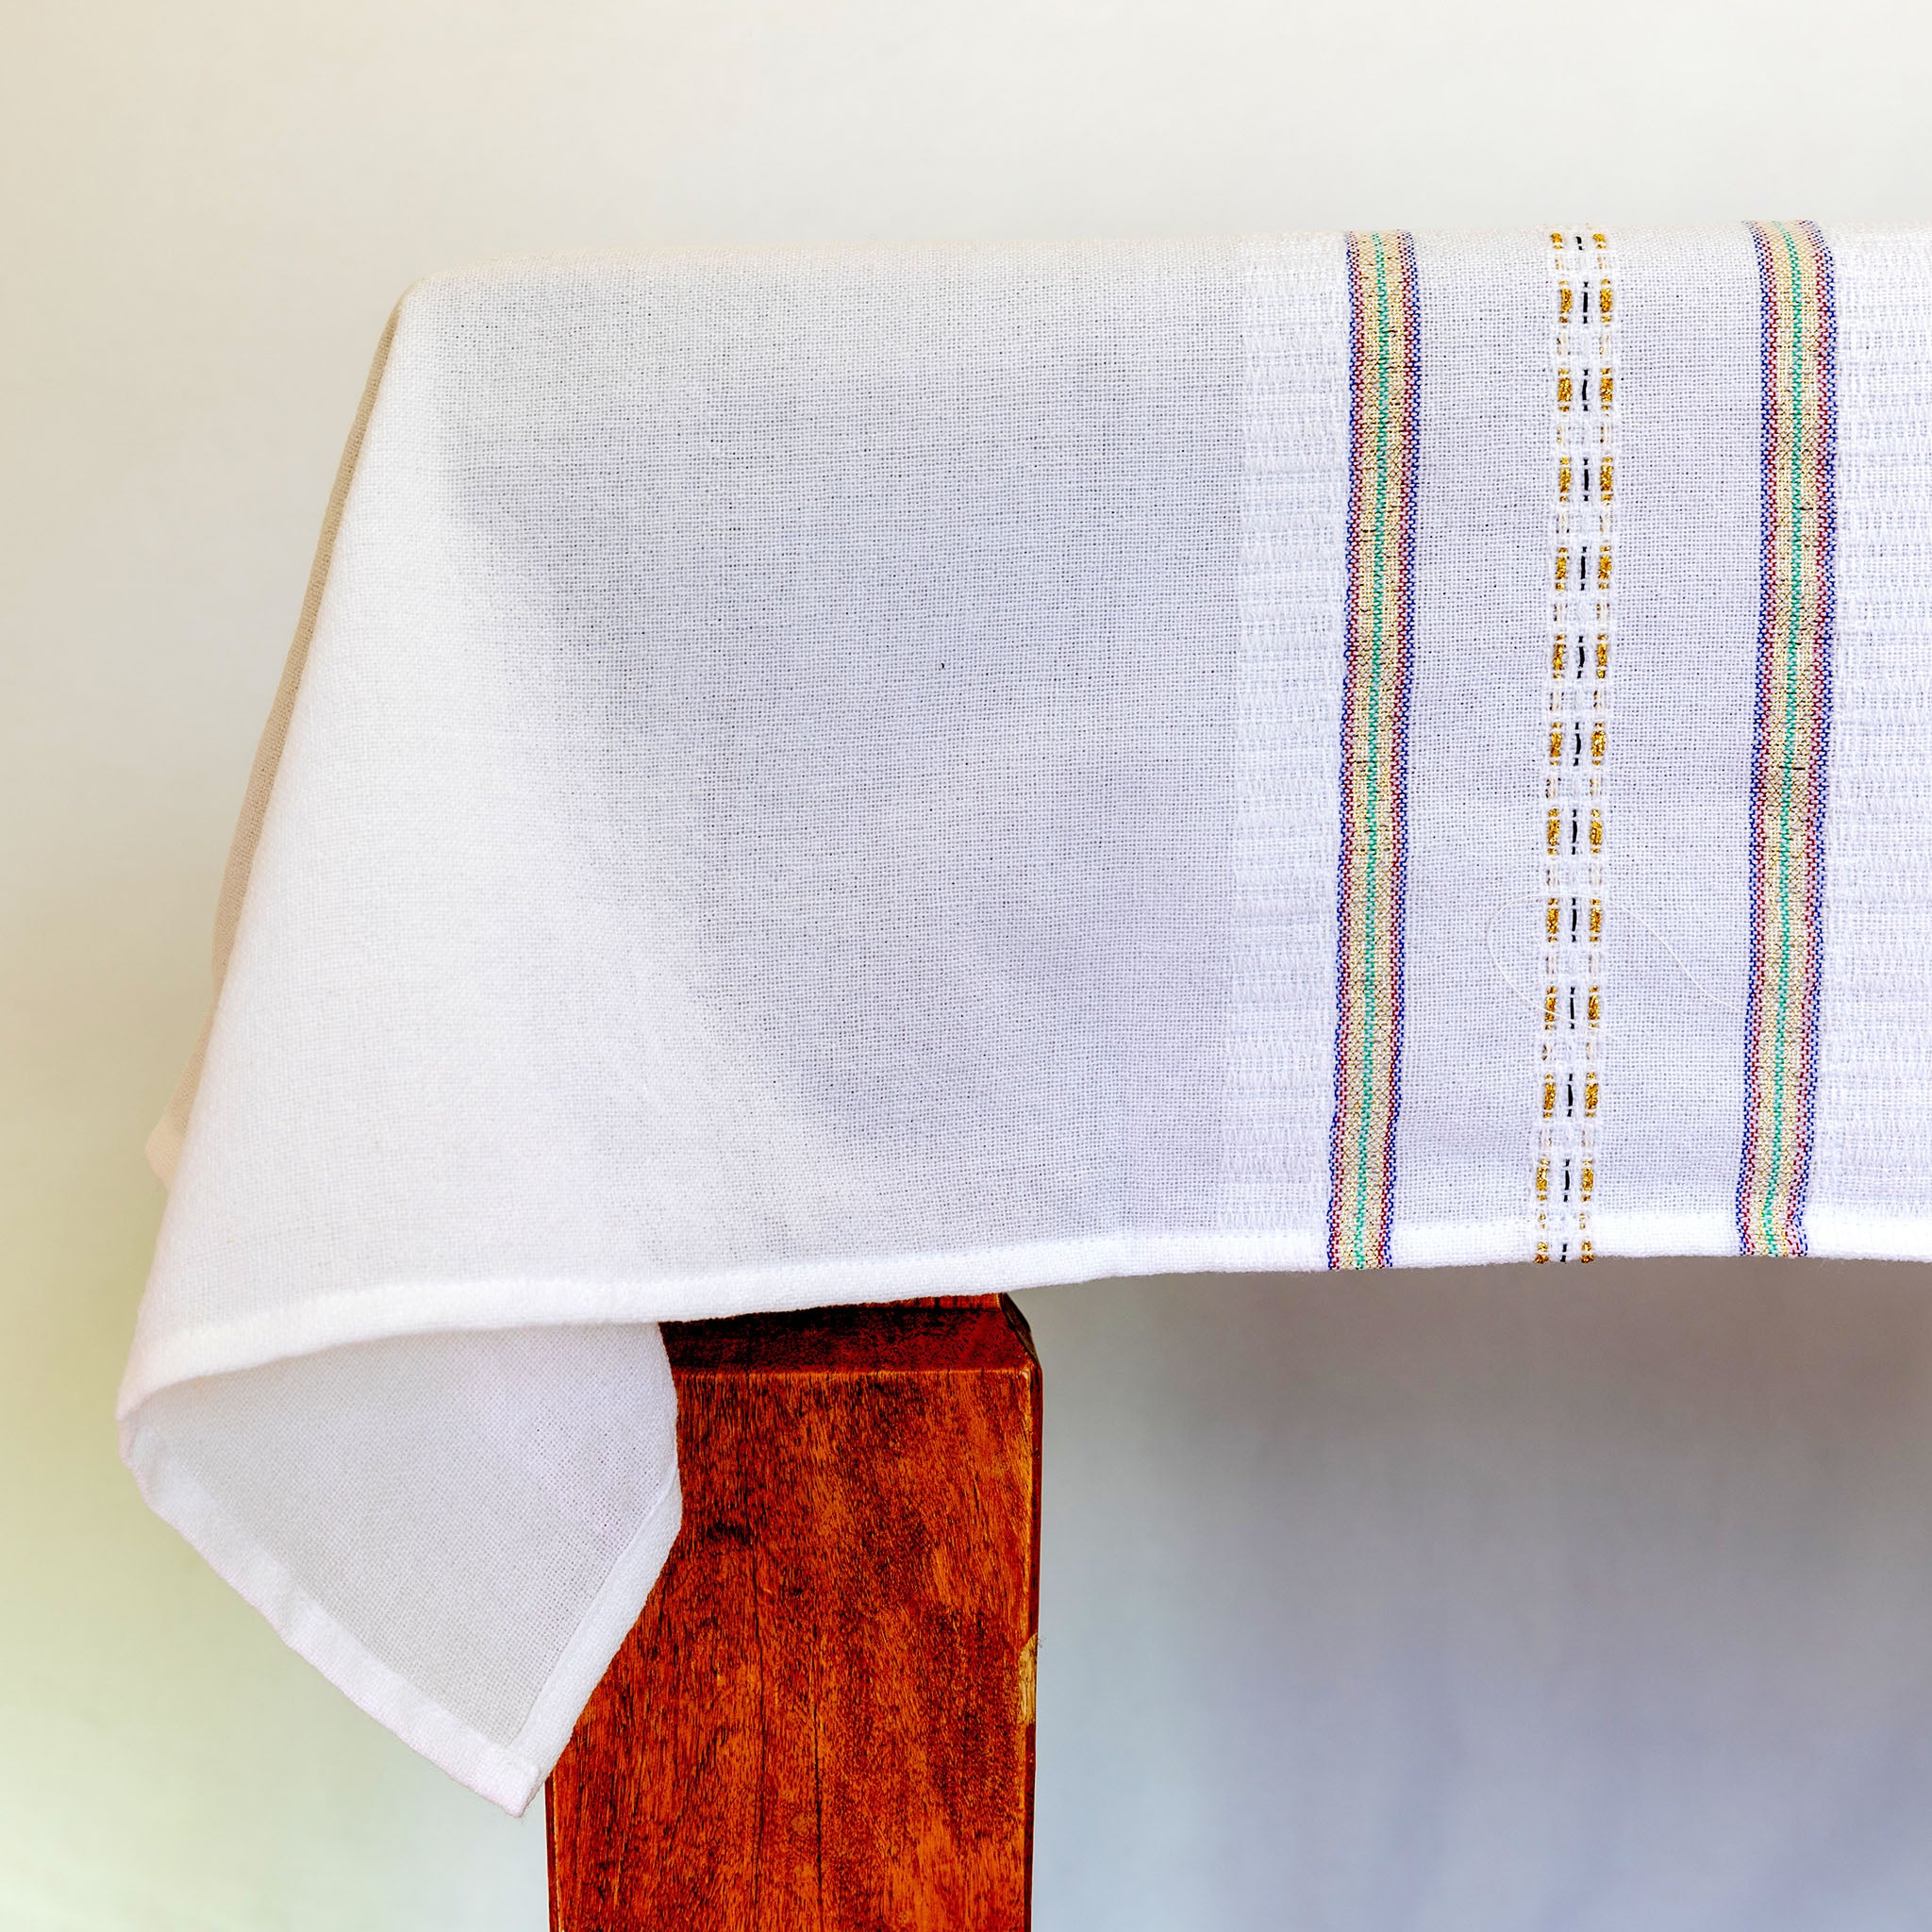 Tablecloths - Gabrieli Design - Blue, Red and Green with Gold on White